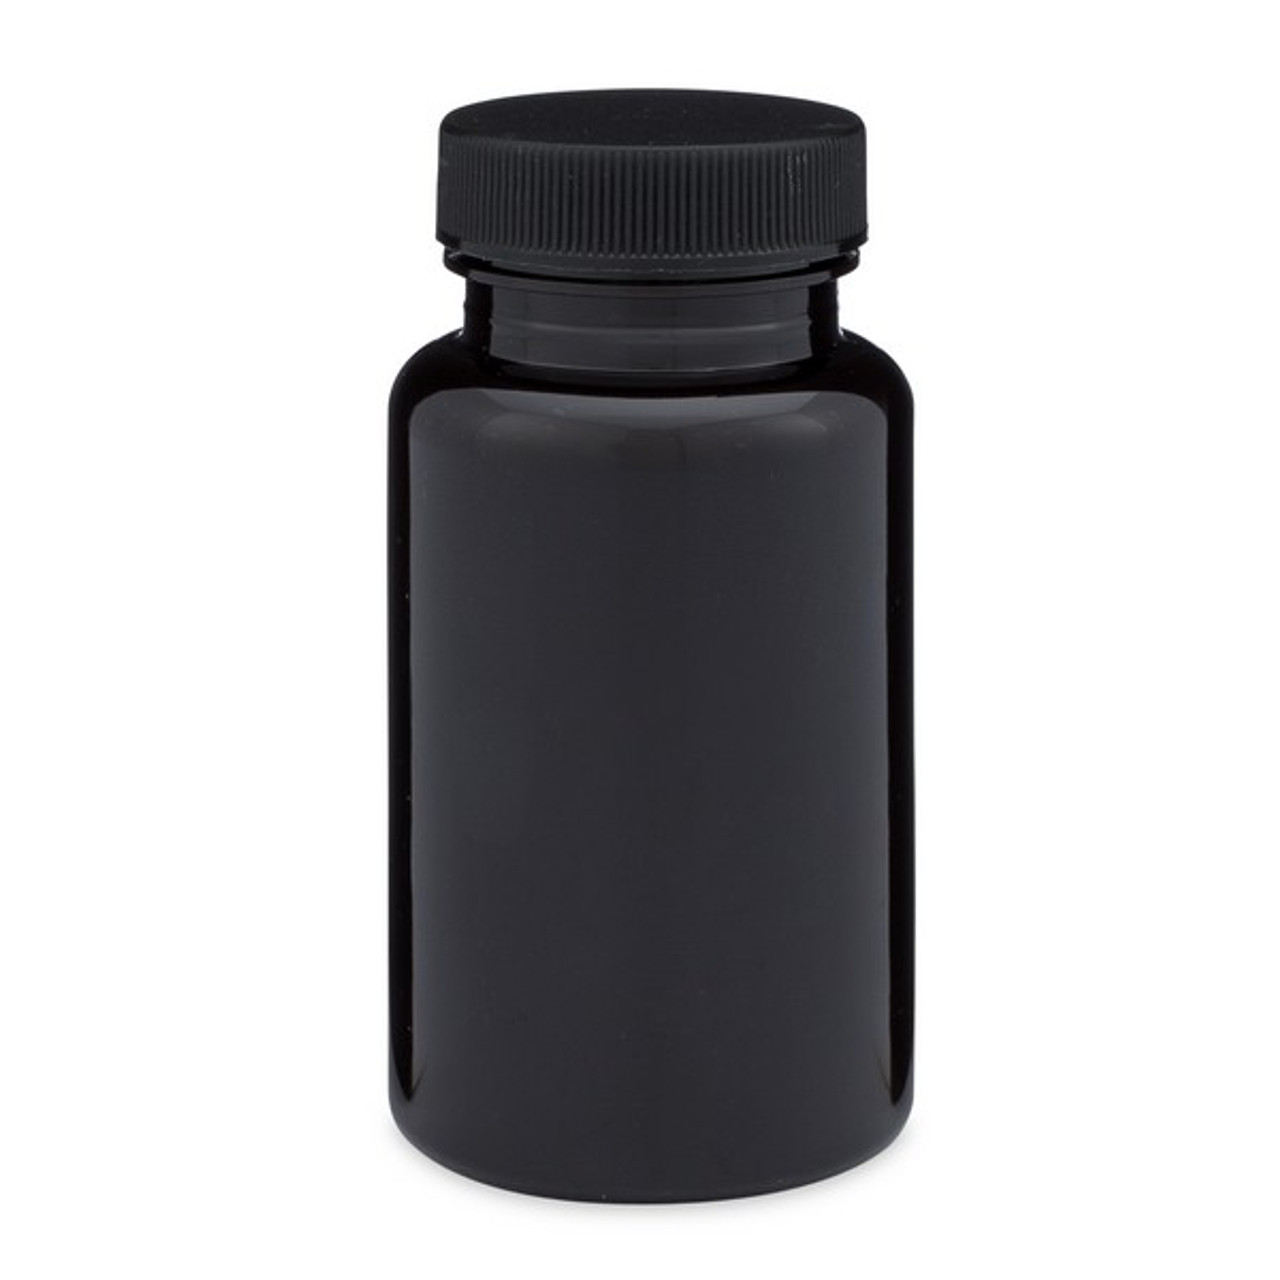 4oz Amber Glass Wide Mouth Packer Bottles (Cap Not Included) - 12/Case, Amber Type III UV Resistant BPA Free 38-400